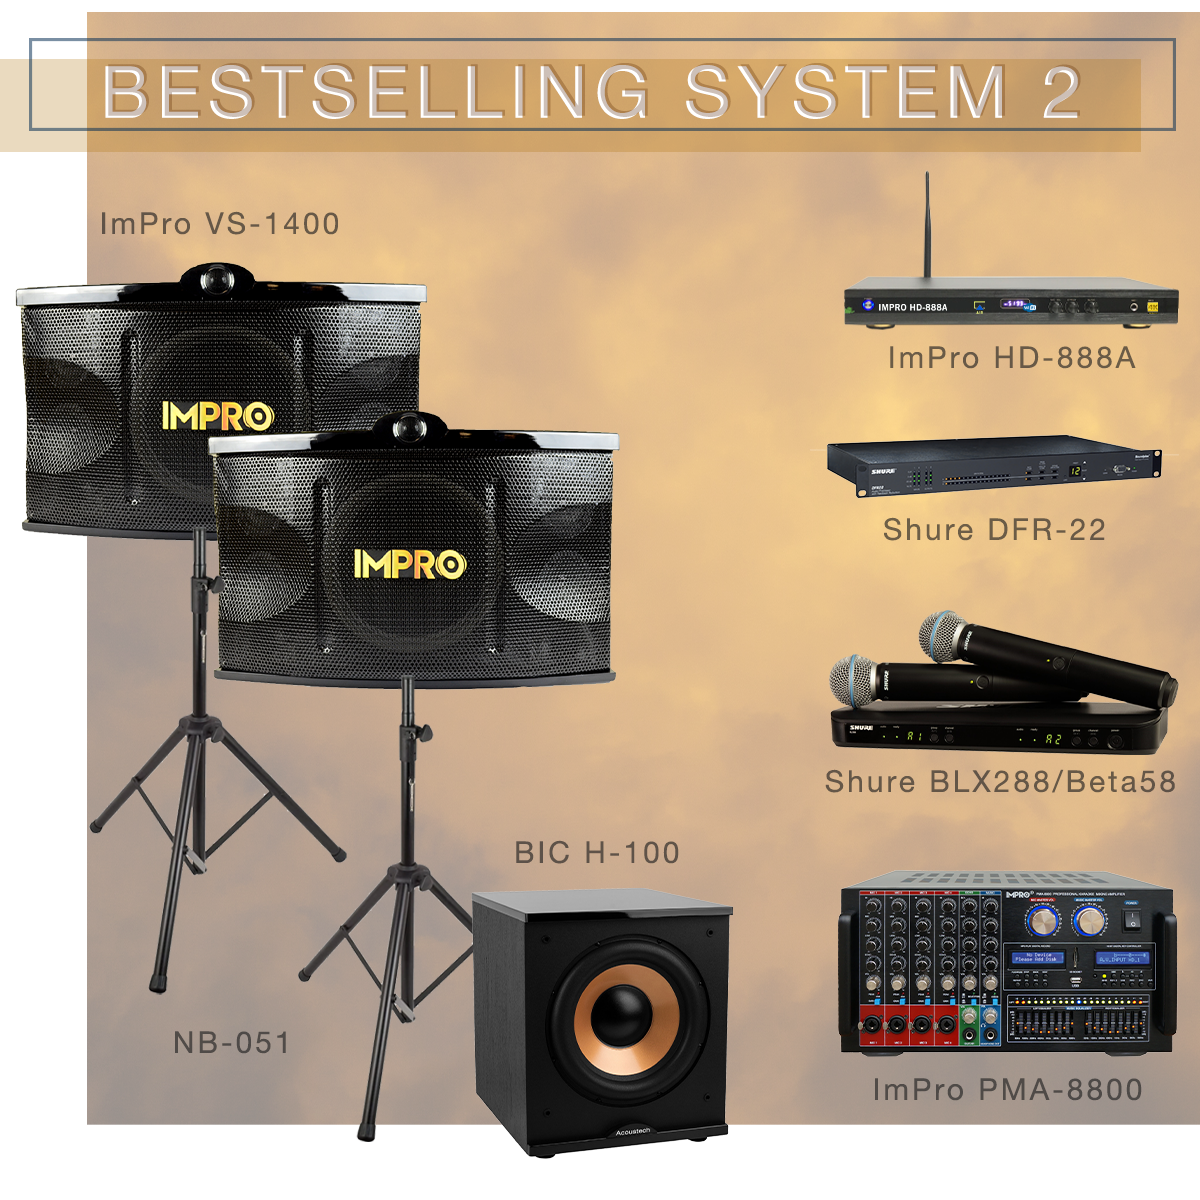 Best Selling System 2 Karaoke Package with ImPro Speakers with Stands, Mixing Amplifier, Karaoke Player, and Shure Microphones